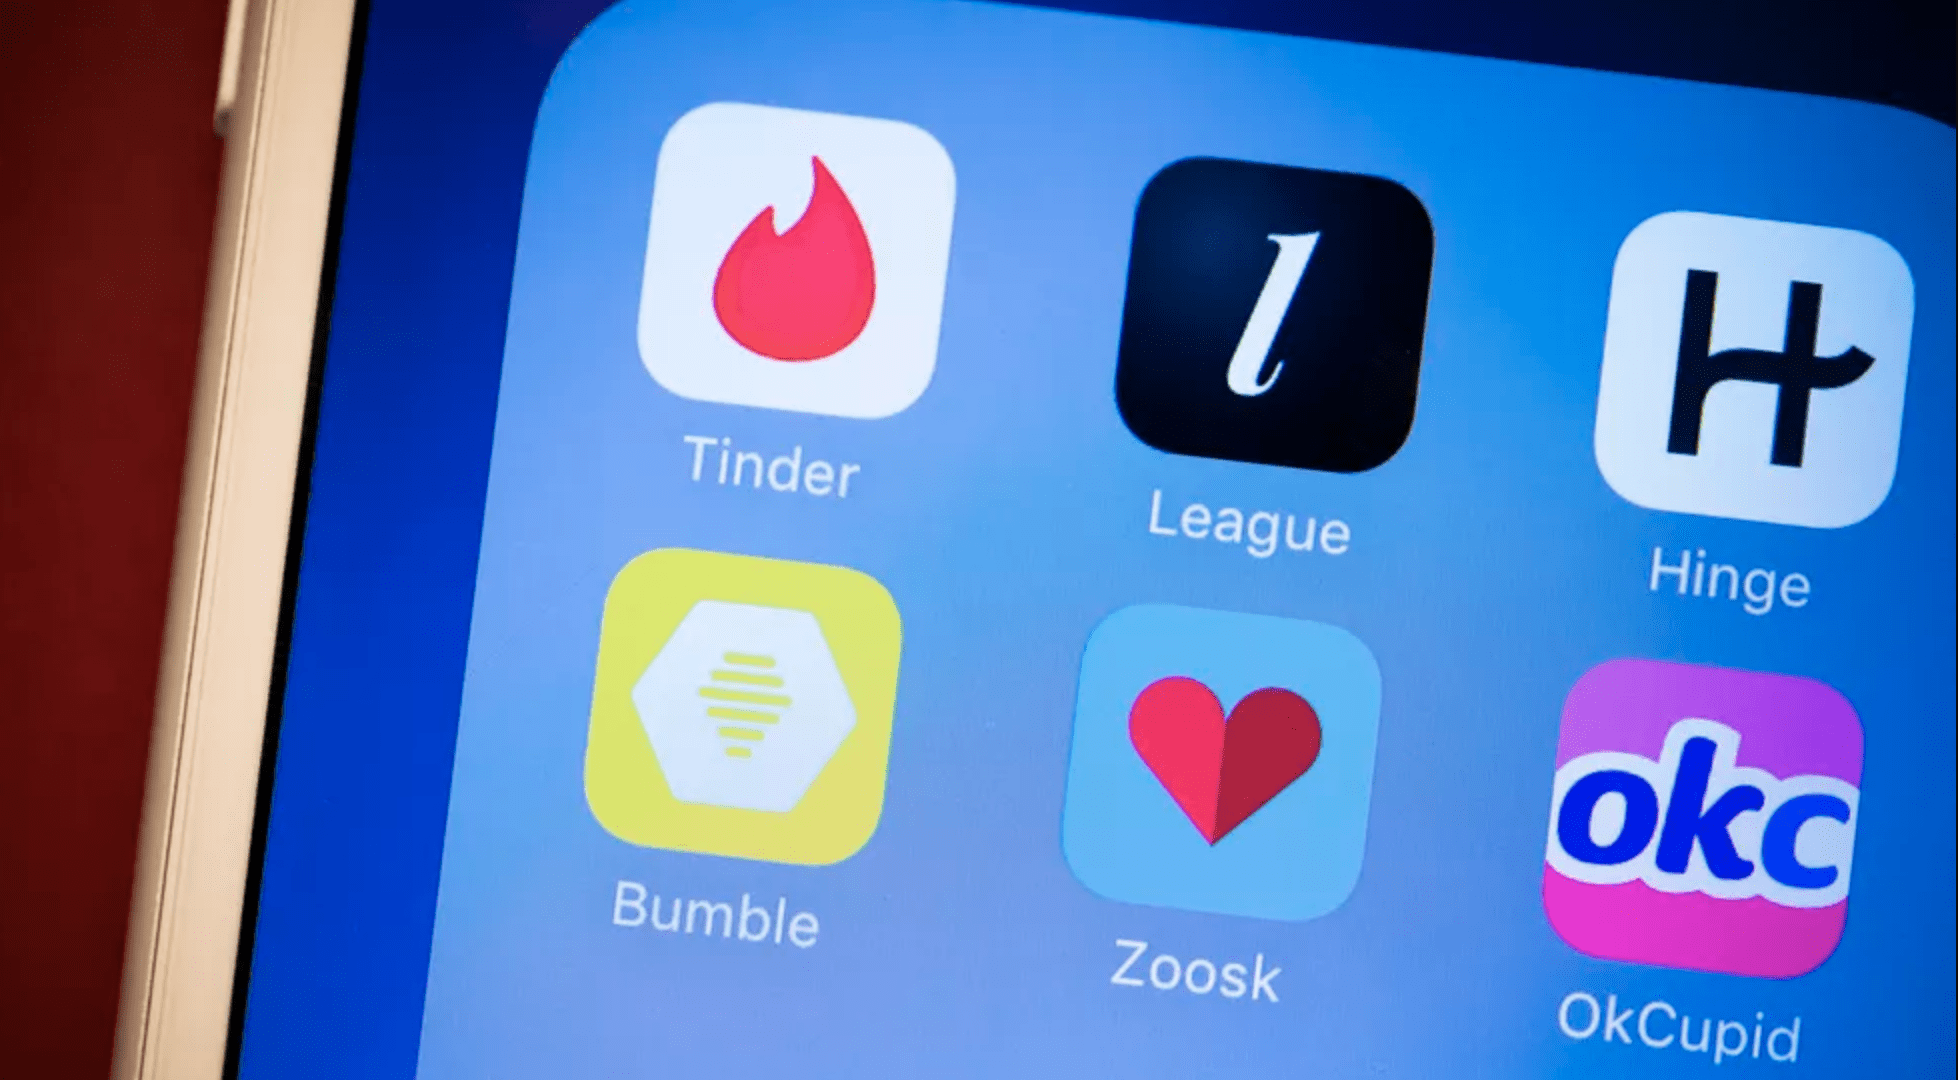 Chinese dating apps are exploiting loneliness of india's men quartz india